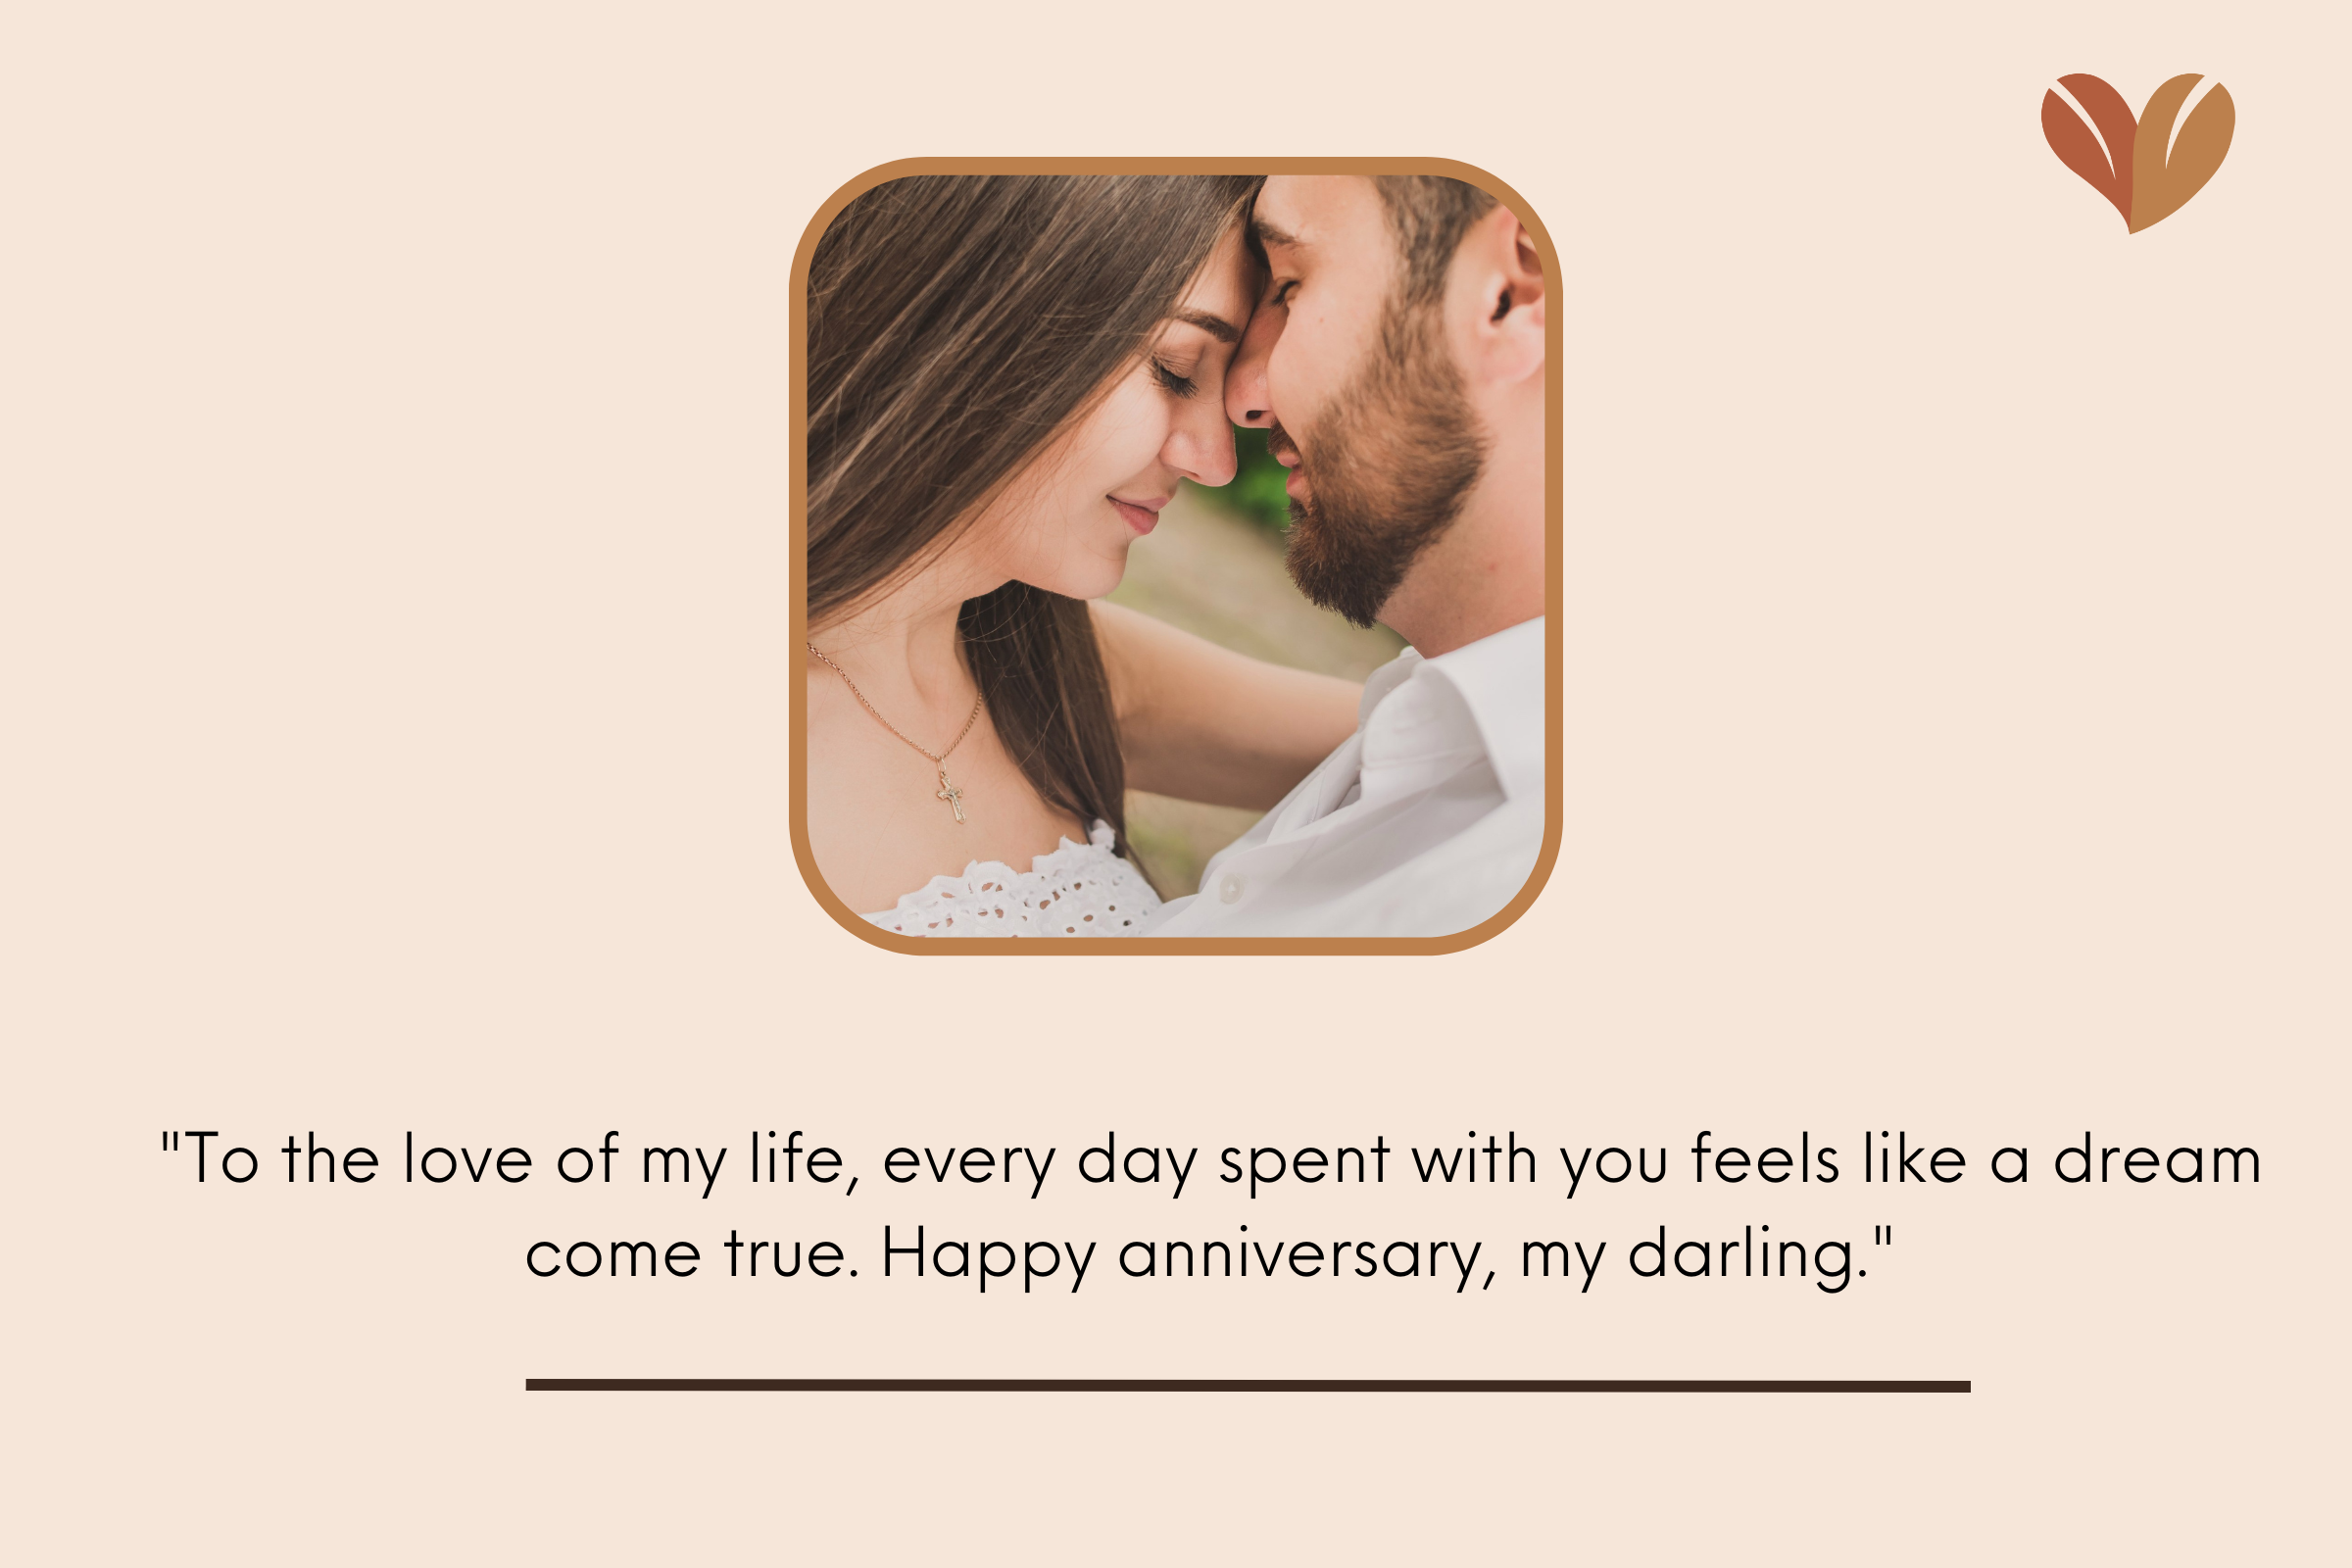 Best Anniversary quotes for couple to say to each other